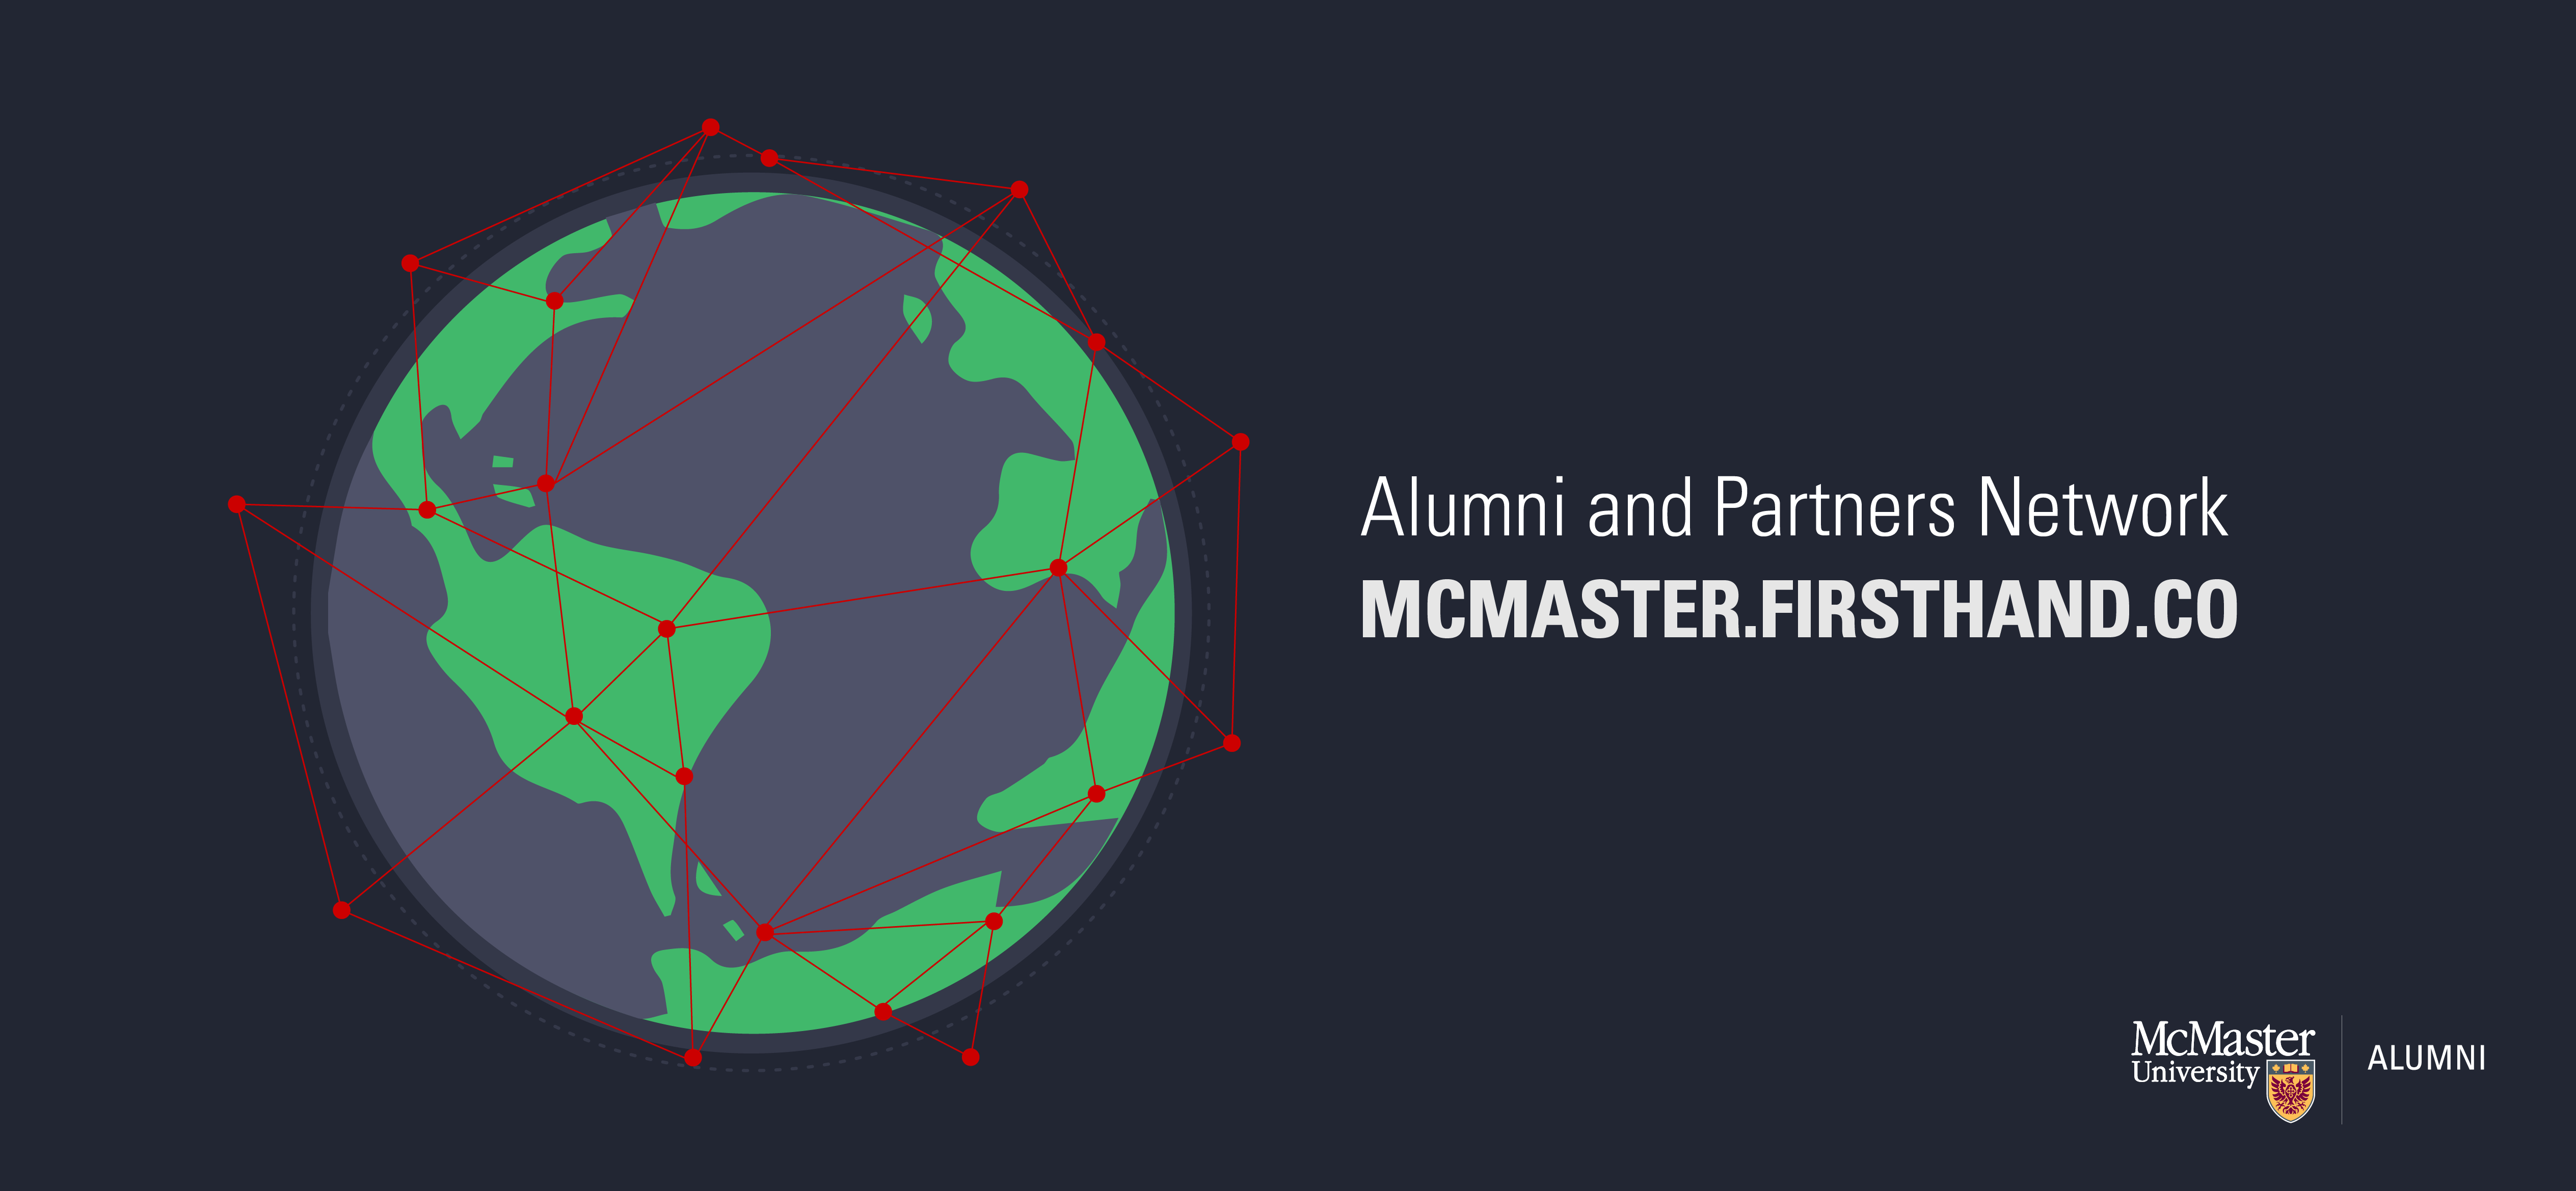 Firsthand Alumni and Partners Network